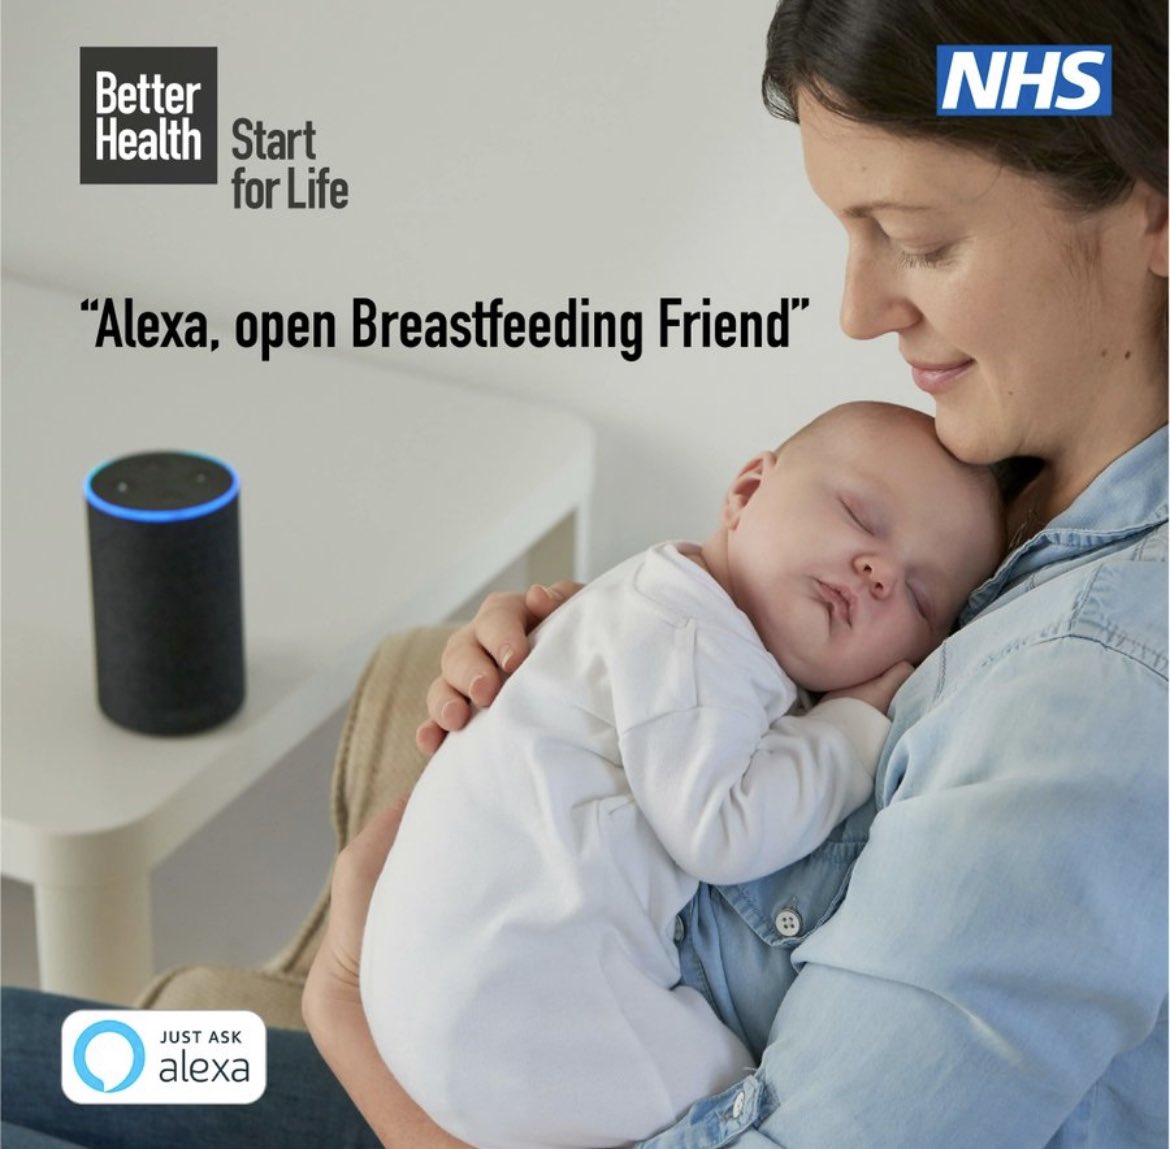 It’s #NationalBreastfeedingWeek 🤱🏿🤱🏽🤱🏼
Did you know there is a Breastfeeding Friend support tool, available on Amazon Alexa. Breastfeeding questions answered and NHS approved advice 24/7